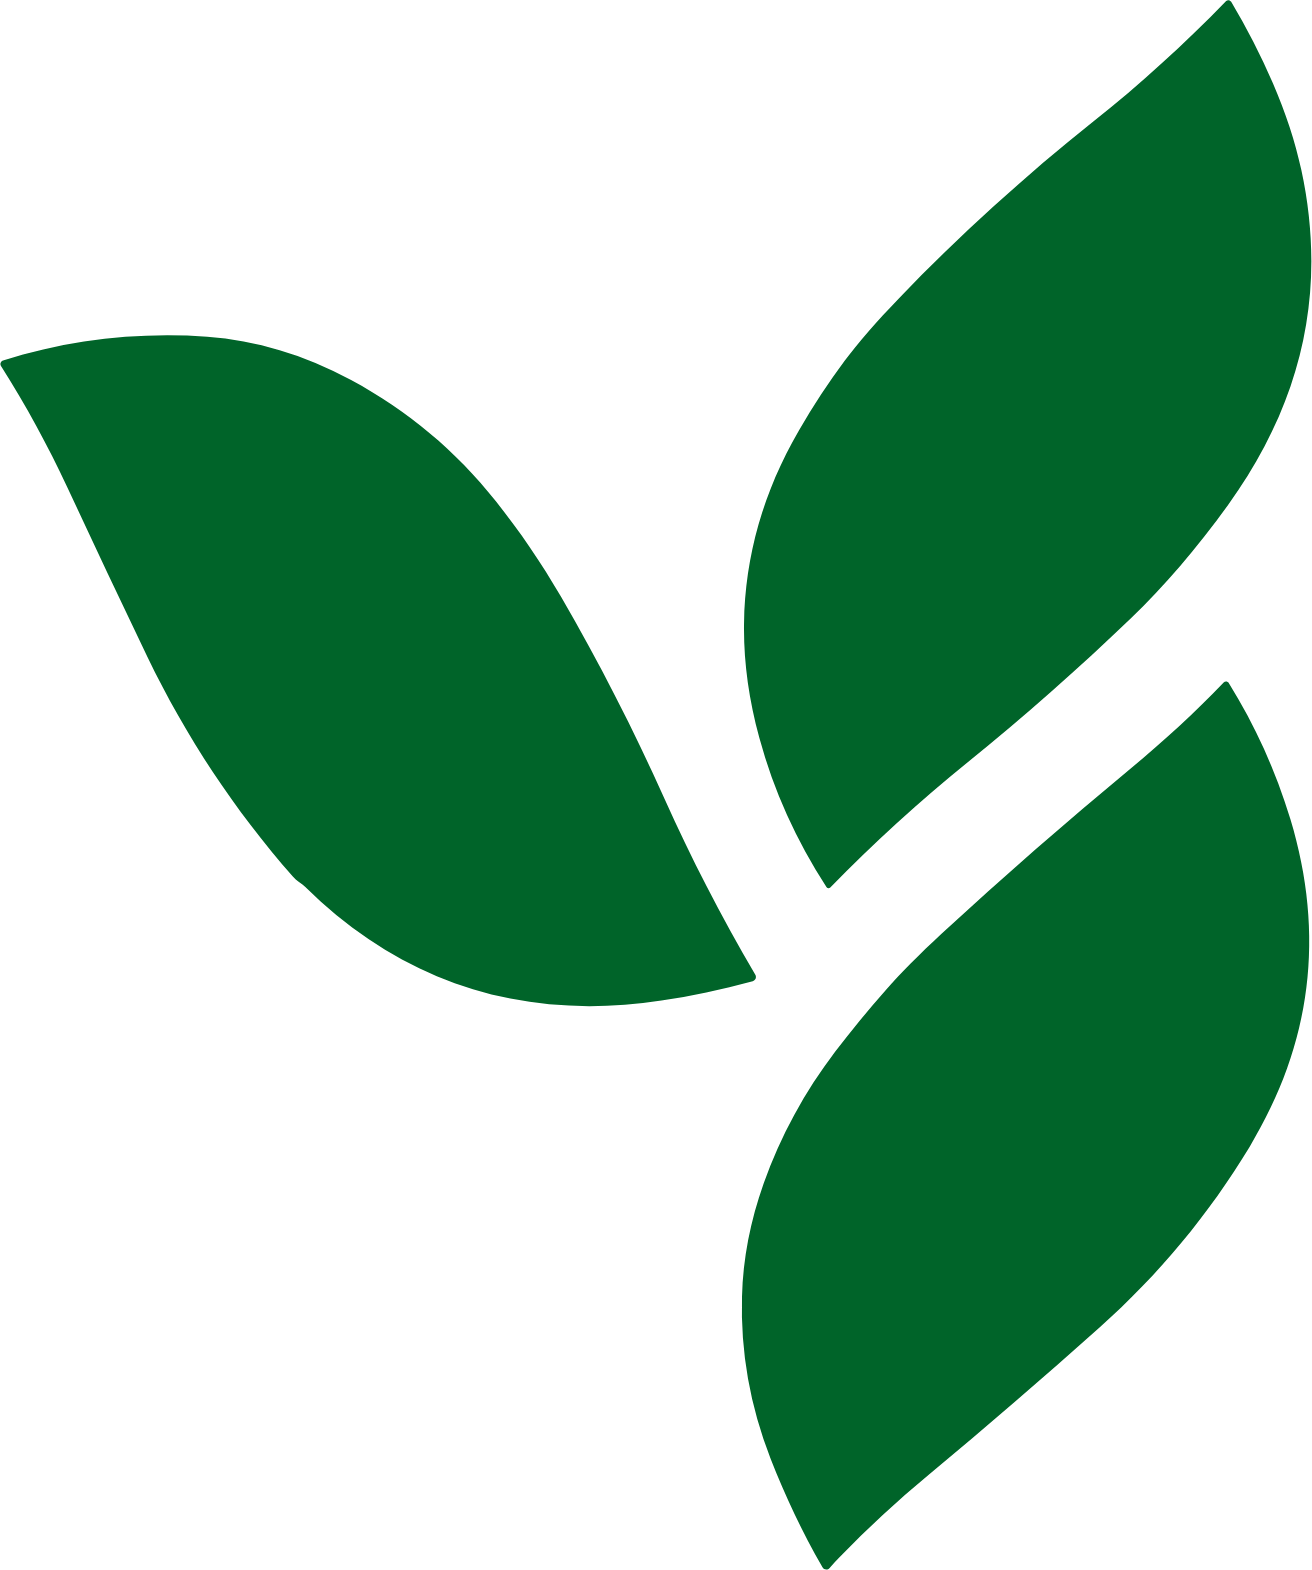 Herbalife logo in transparent PNG and vectorized SVG formats